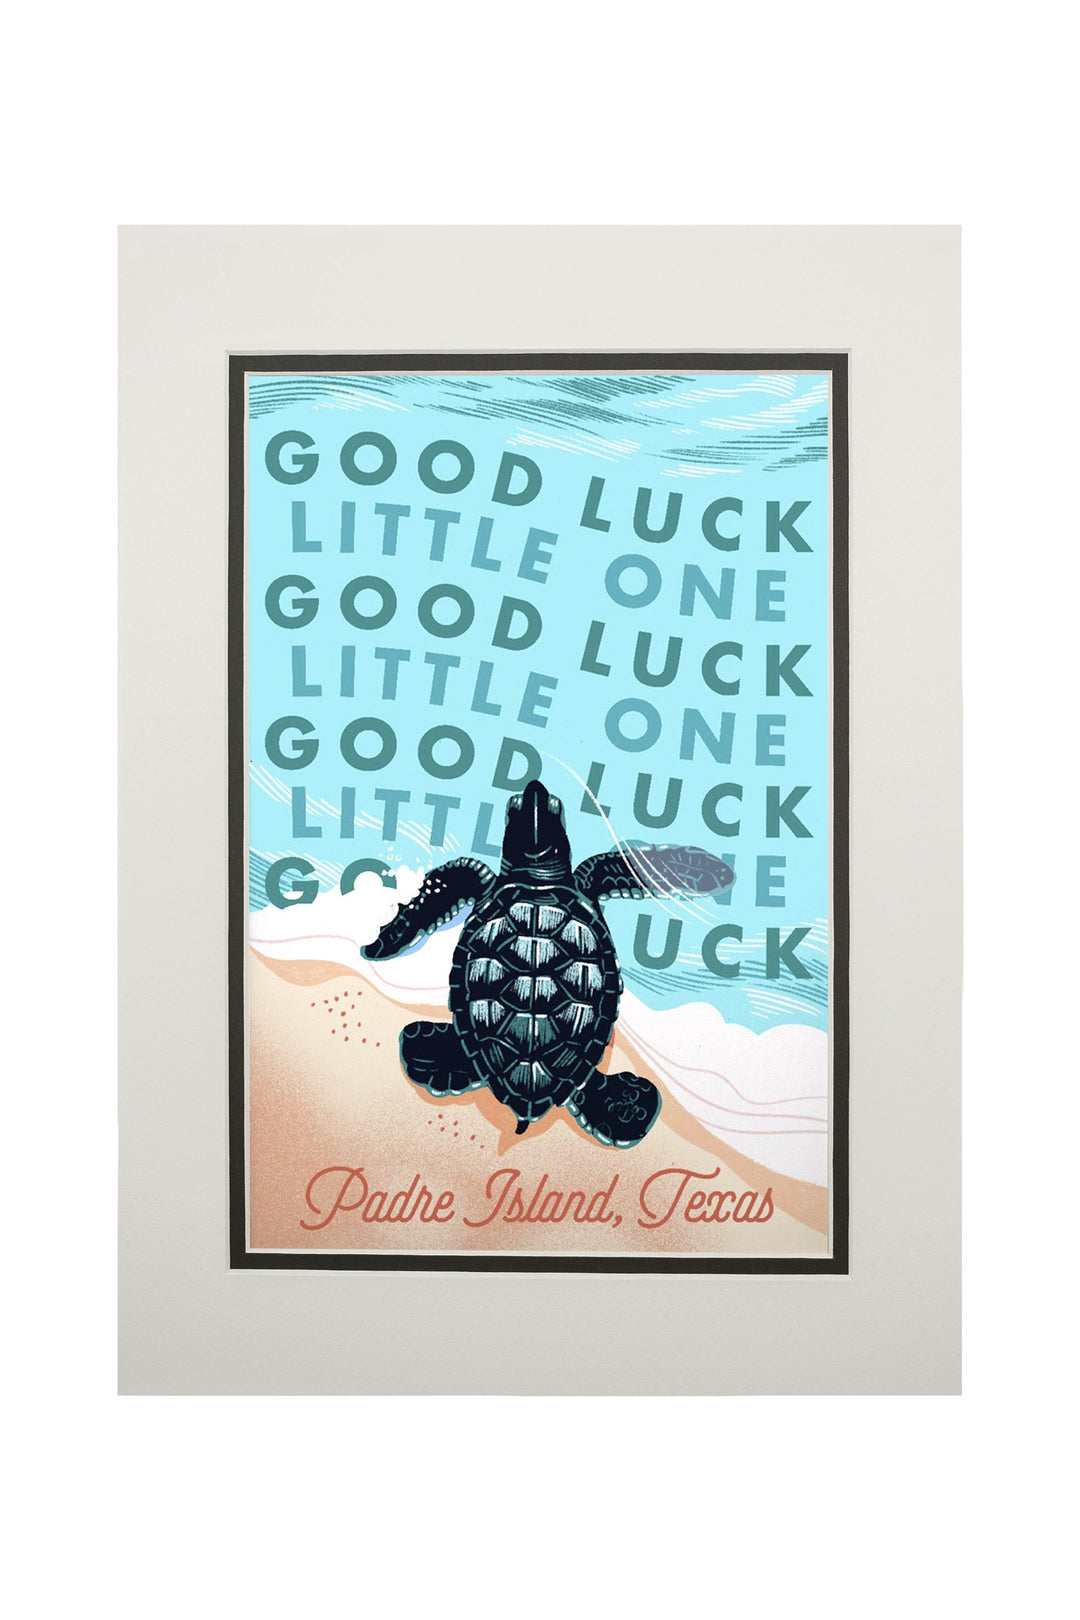 Padre Island, Texas, Courageous Explorer Collection, Turtle, Good Luck Little One, Art Prints and Metal Signs Art Lantern Press 11 x 14 Matted Art Print 